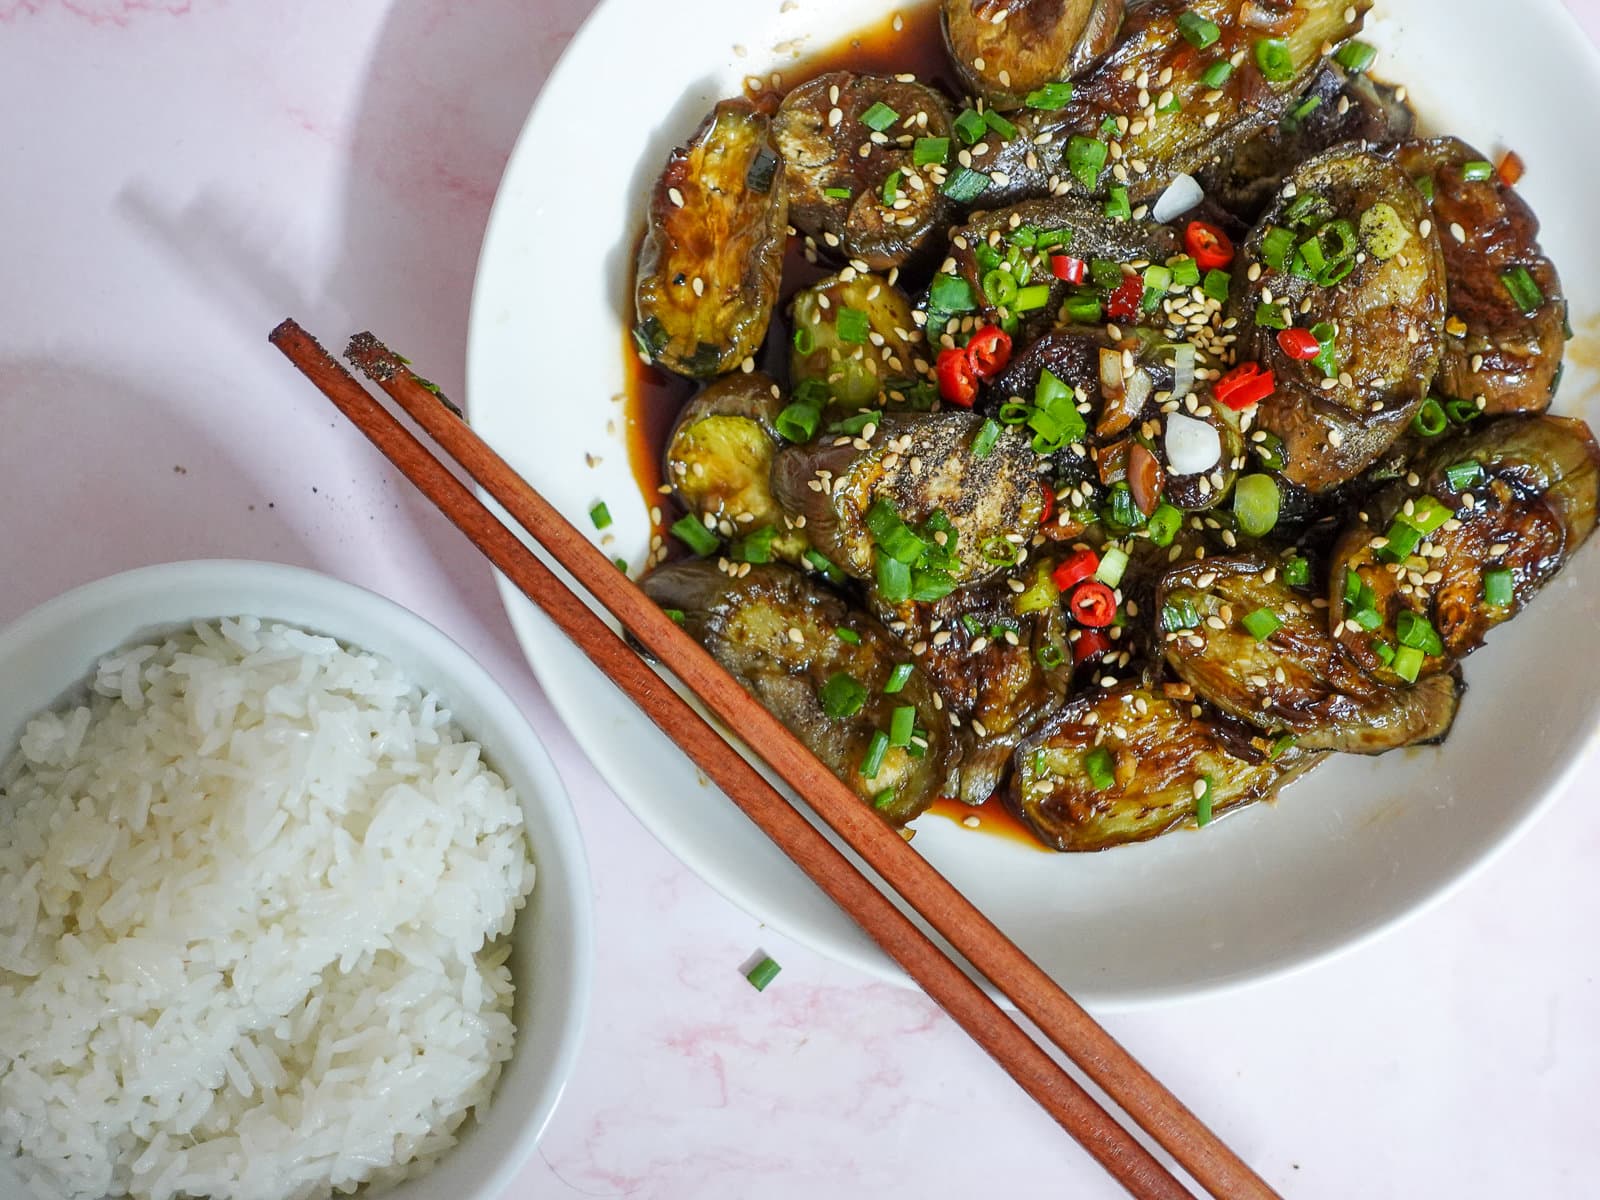 a meal incorporated with Vietnamese braised eggplant